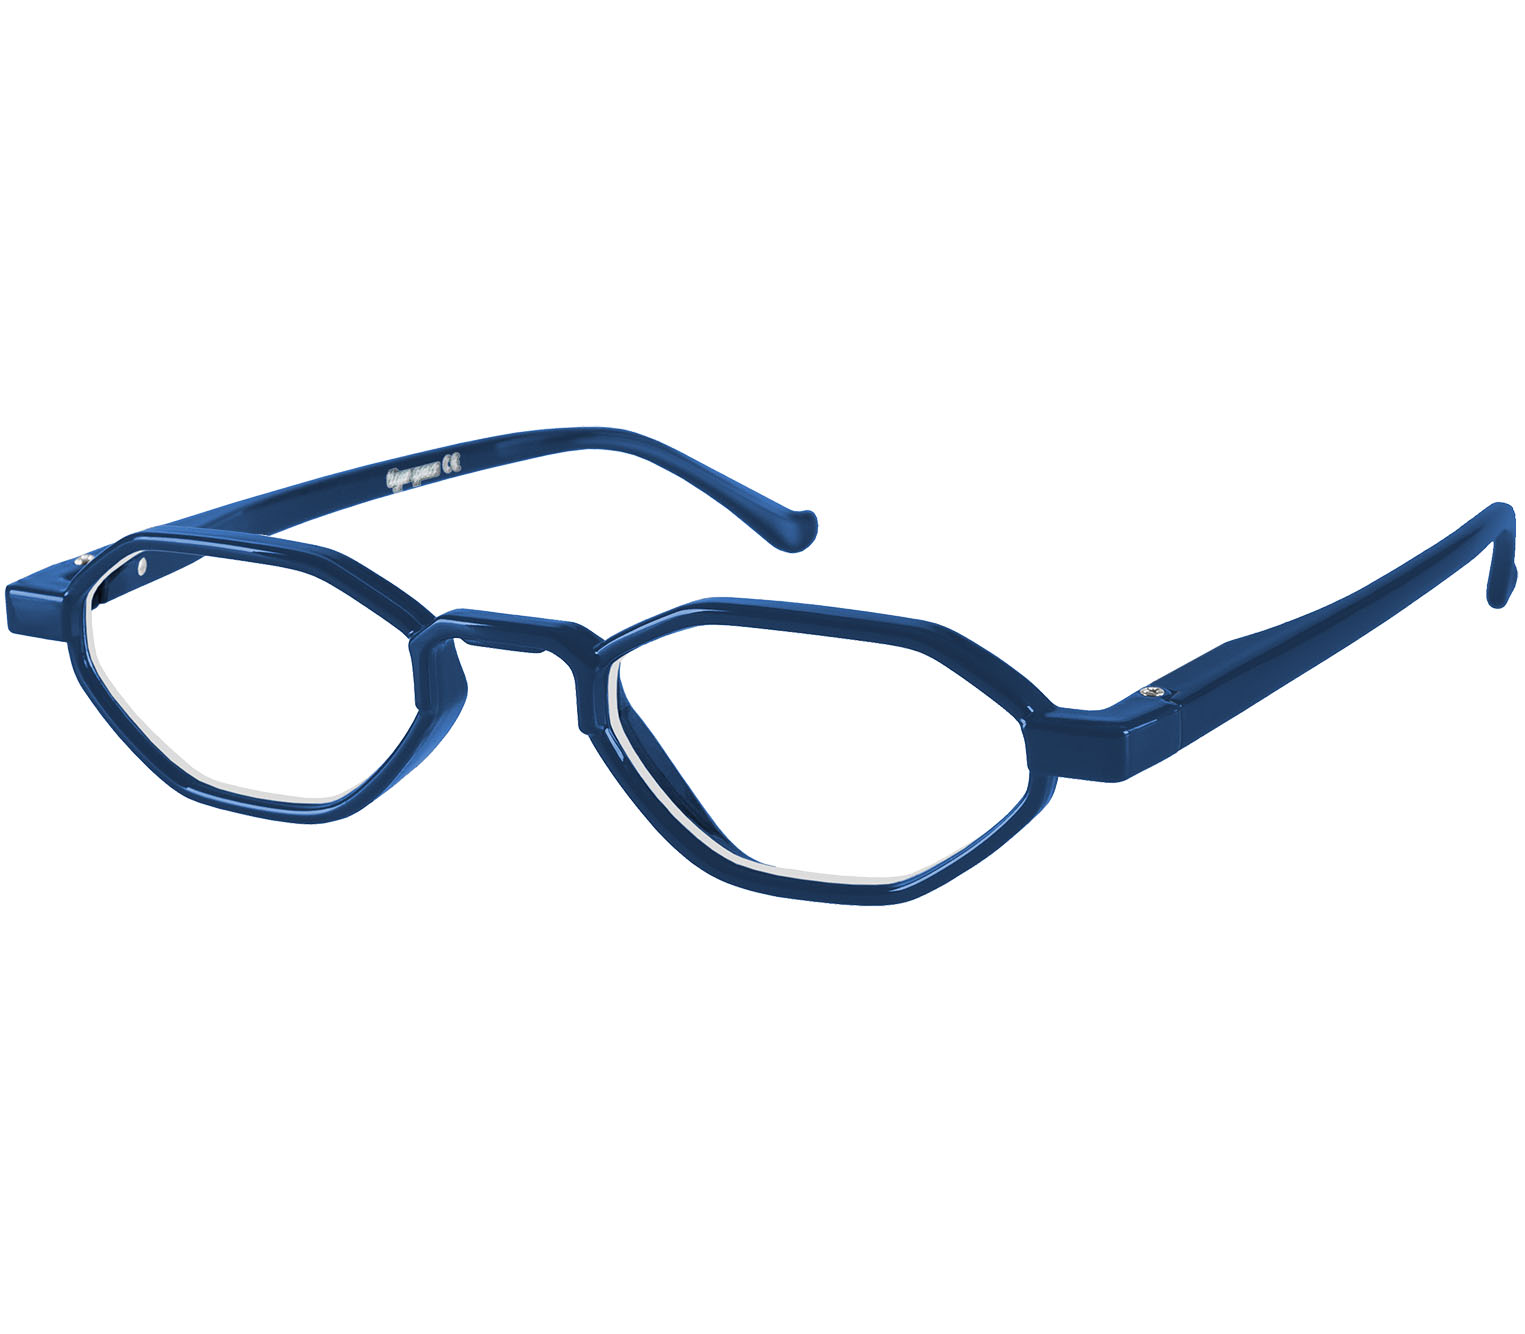 Quincy Blue Reading Glasses Tiger Specs